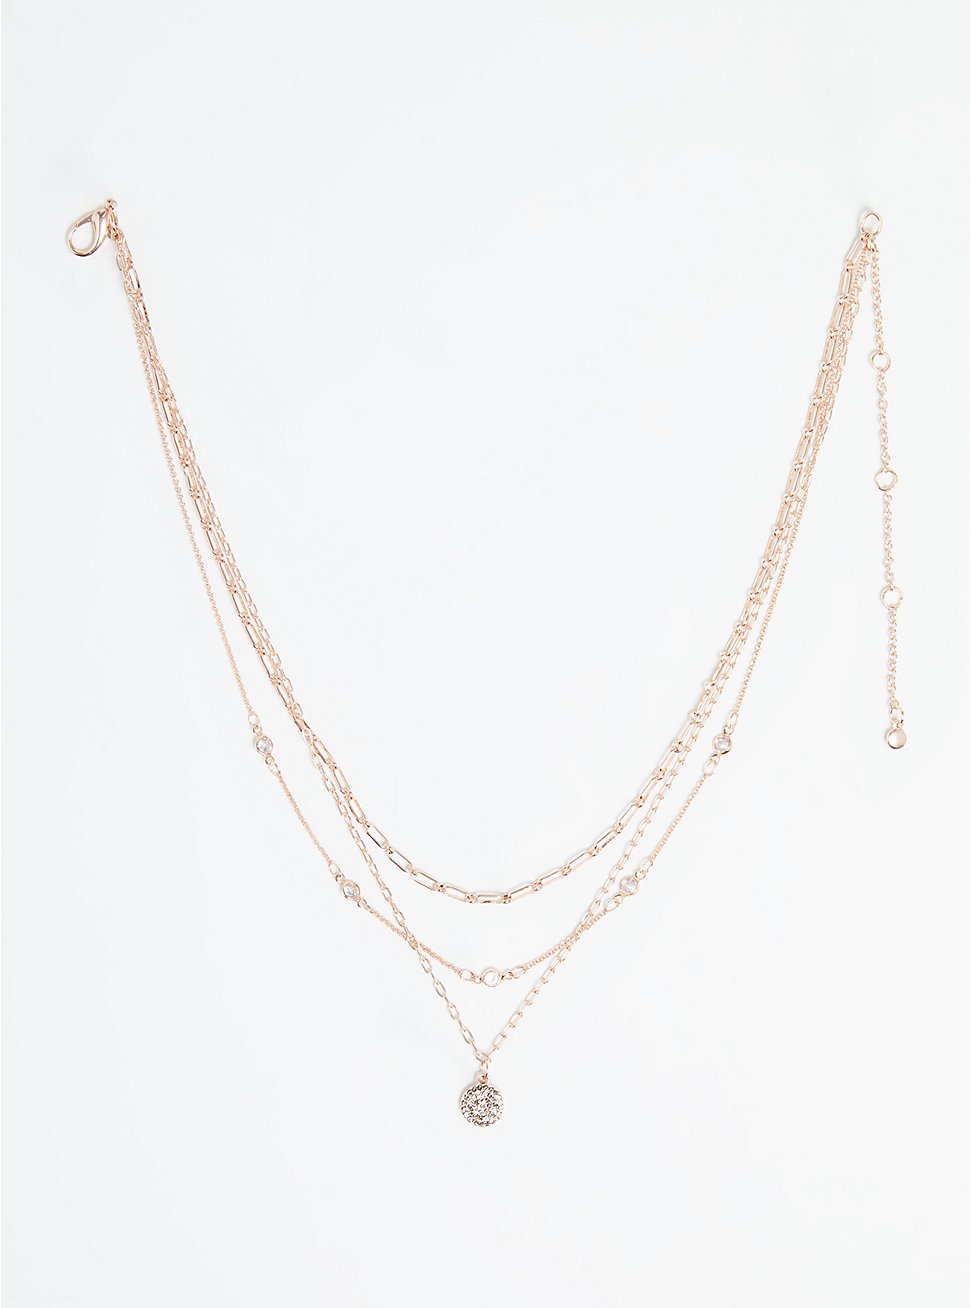 Bezel Chain Layered Necklace with Pave Disc - Rose Gold Tone, , hi-res